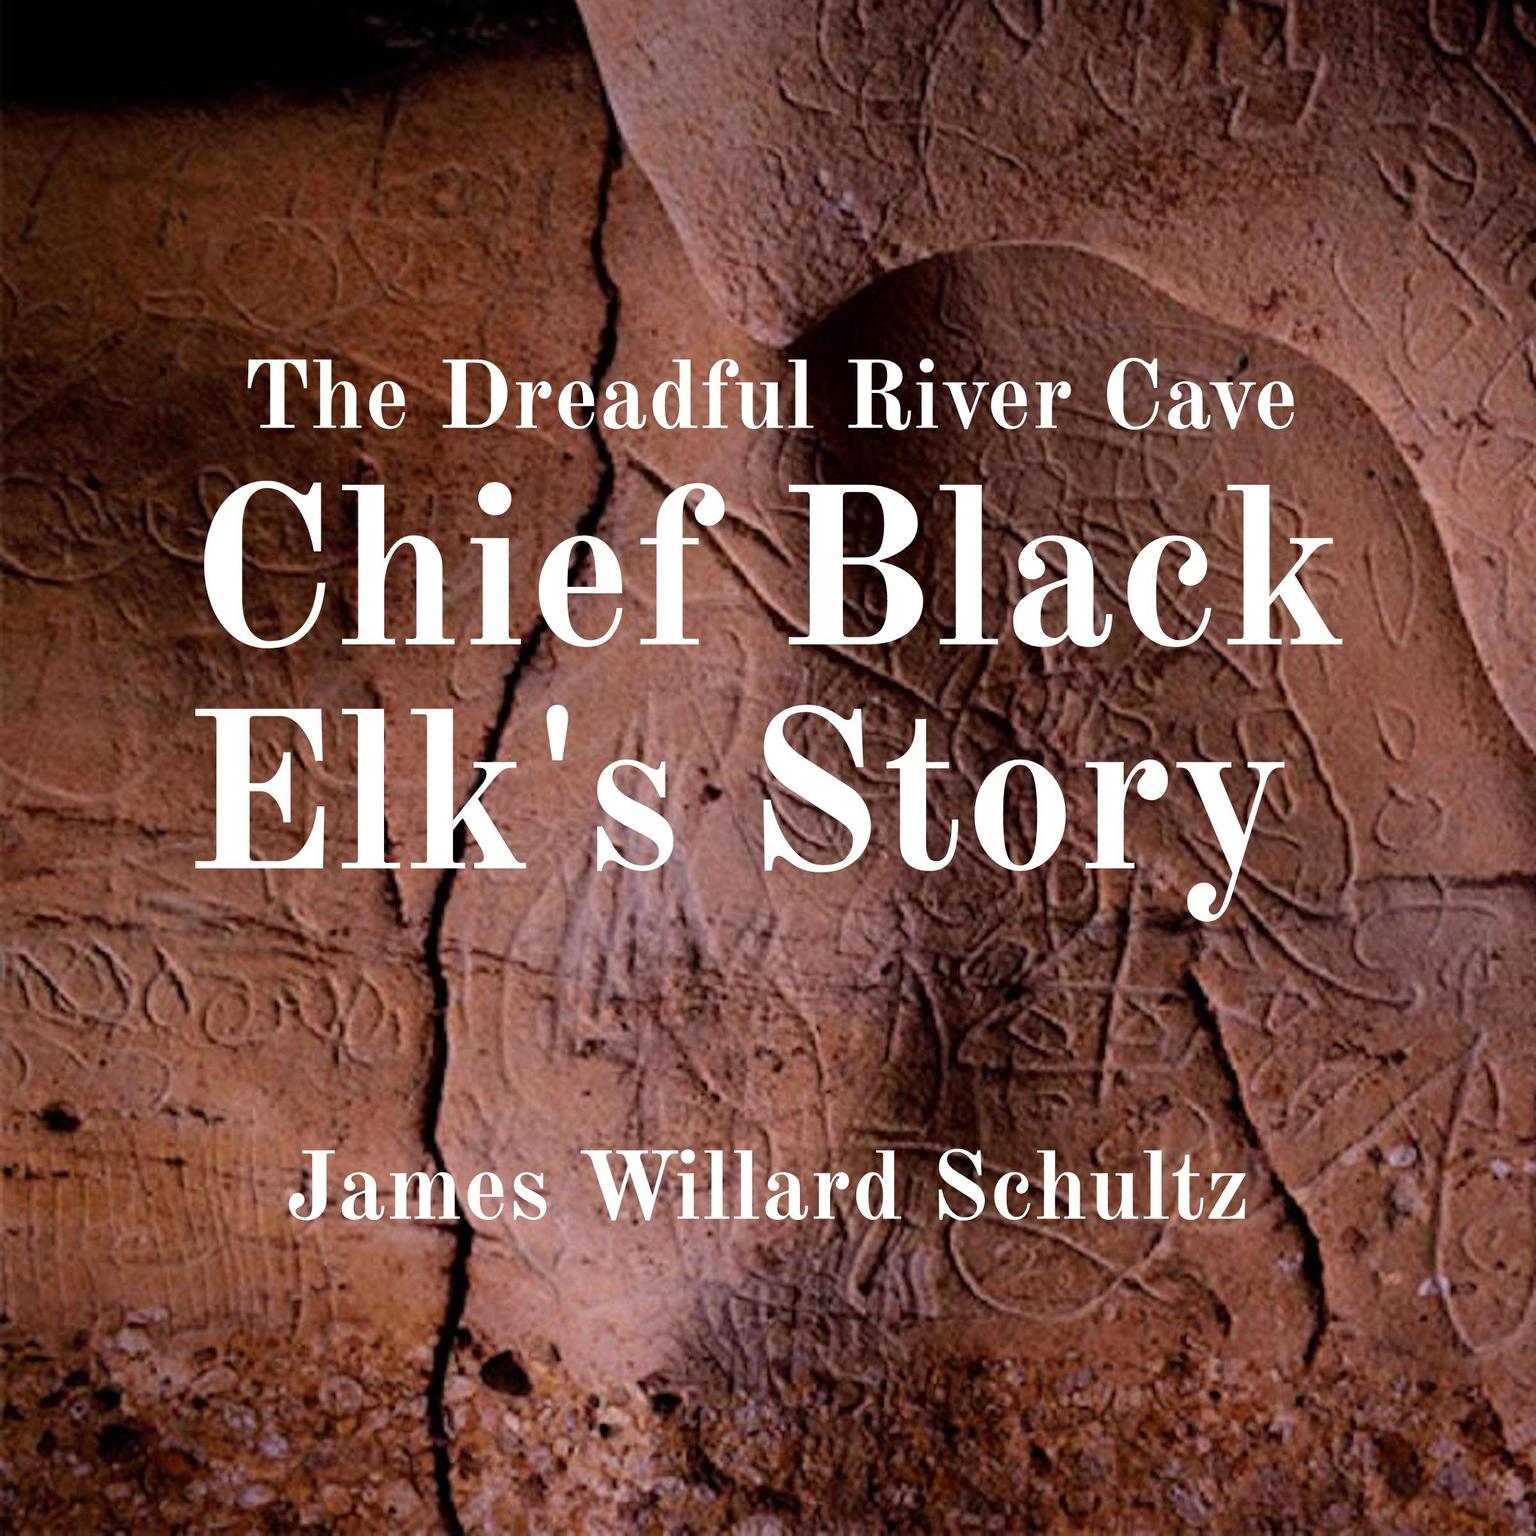 The Dreadful River Cave: Chief Black Elks Story Audiobook, by James Willard Schultz